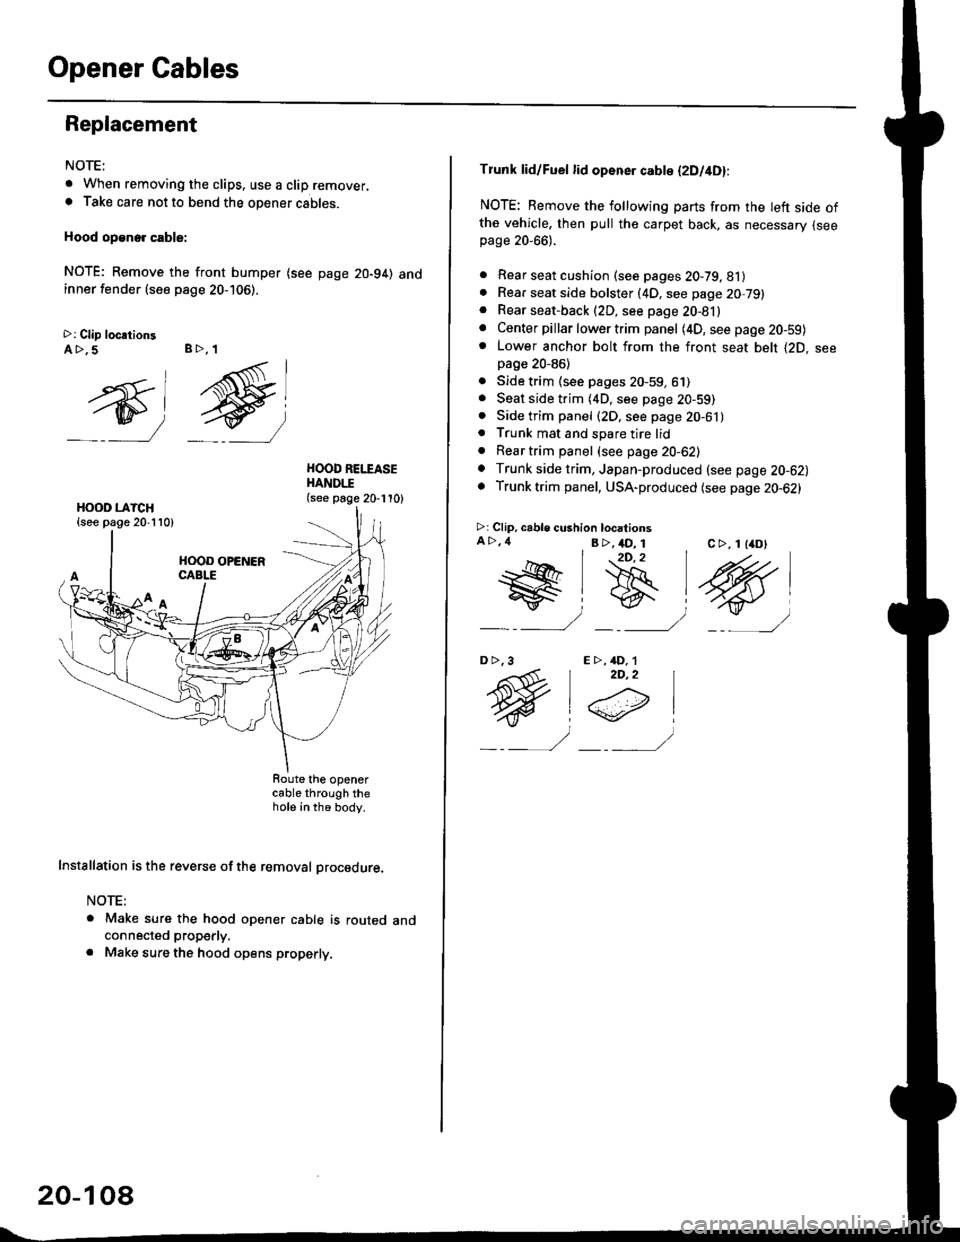 HONDA CIVIC 1998 6.G Workshop Manual Opener Cables
Replacement
NOTE:
t When removing the clips. use a clip remover.. Take care not to bend the opener cables.
Hood op€ne. cable:
NOTE; Remove the front bumper (see page 20-94) andinner fe